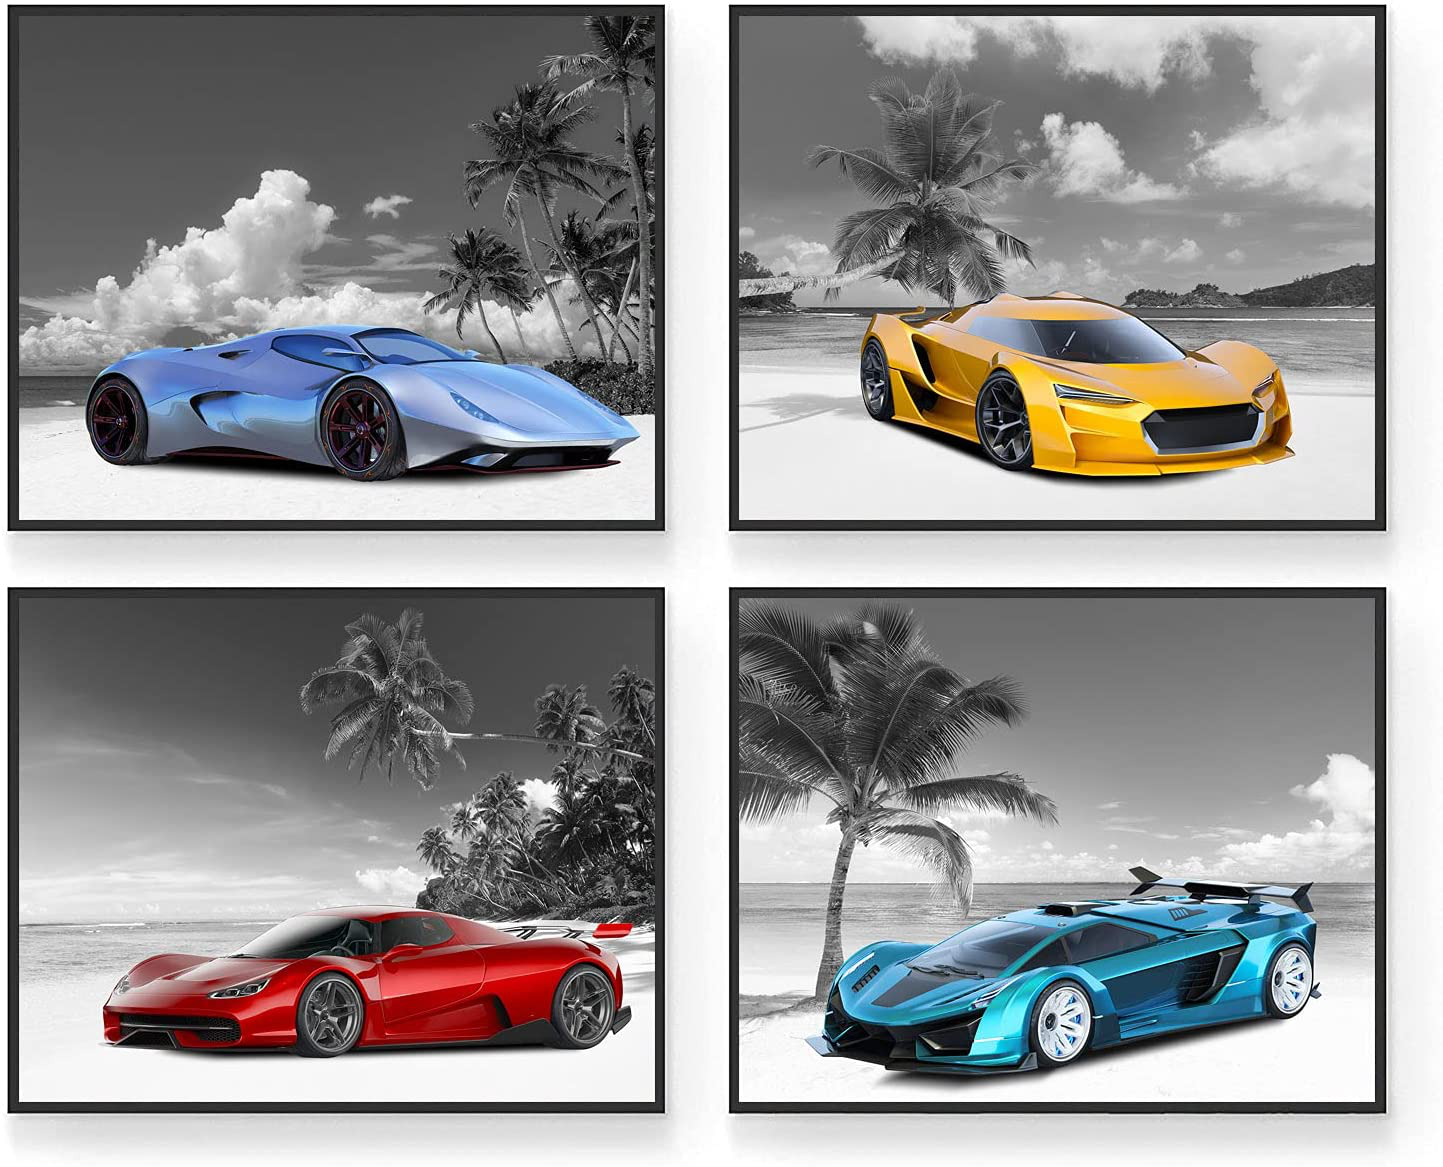 Sports Car Wall Decor, Car Pictures - Set of 4 (8x10in) Mountain Supercar Boys Posters for Bedrooms - Car Room Decor, Car Wall Decor, Wall Art Boys Room - Unframed Wall Art Car